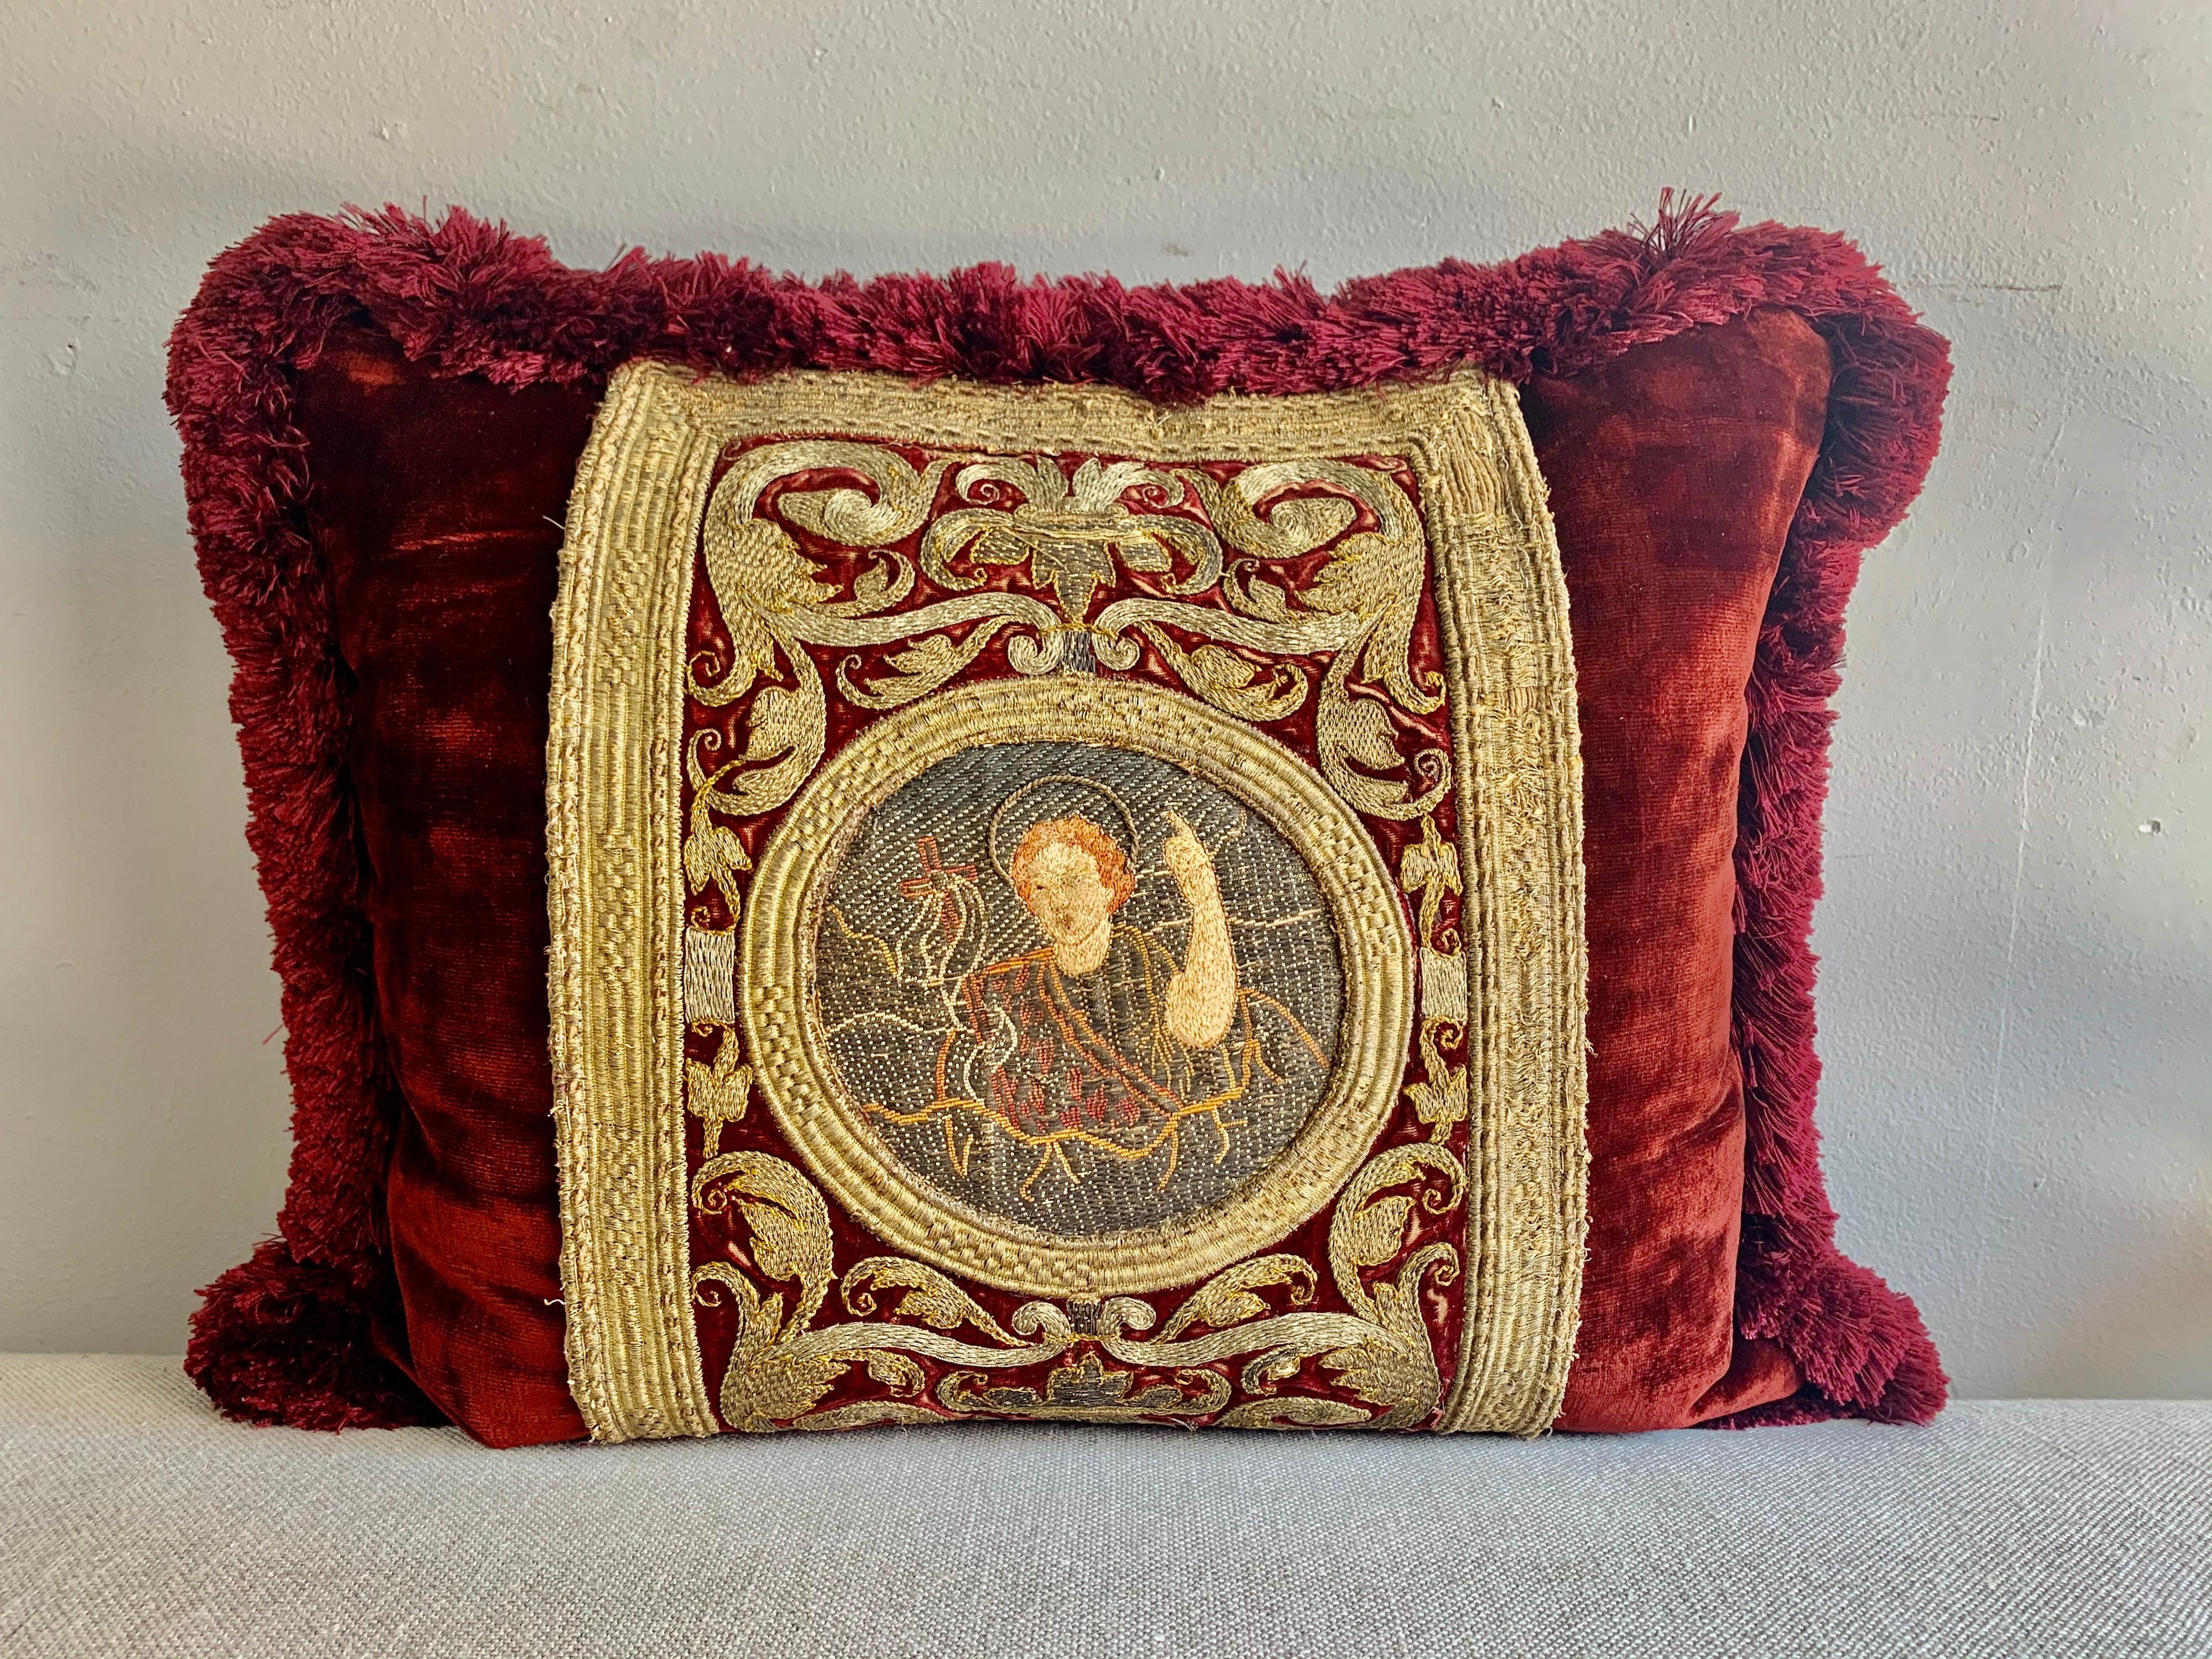 Baroque Pair of 18th Century Metallic Embroidered Red Velvet Pillows